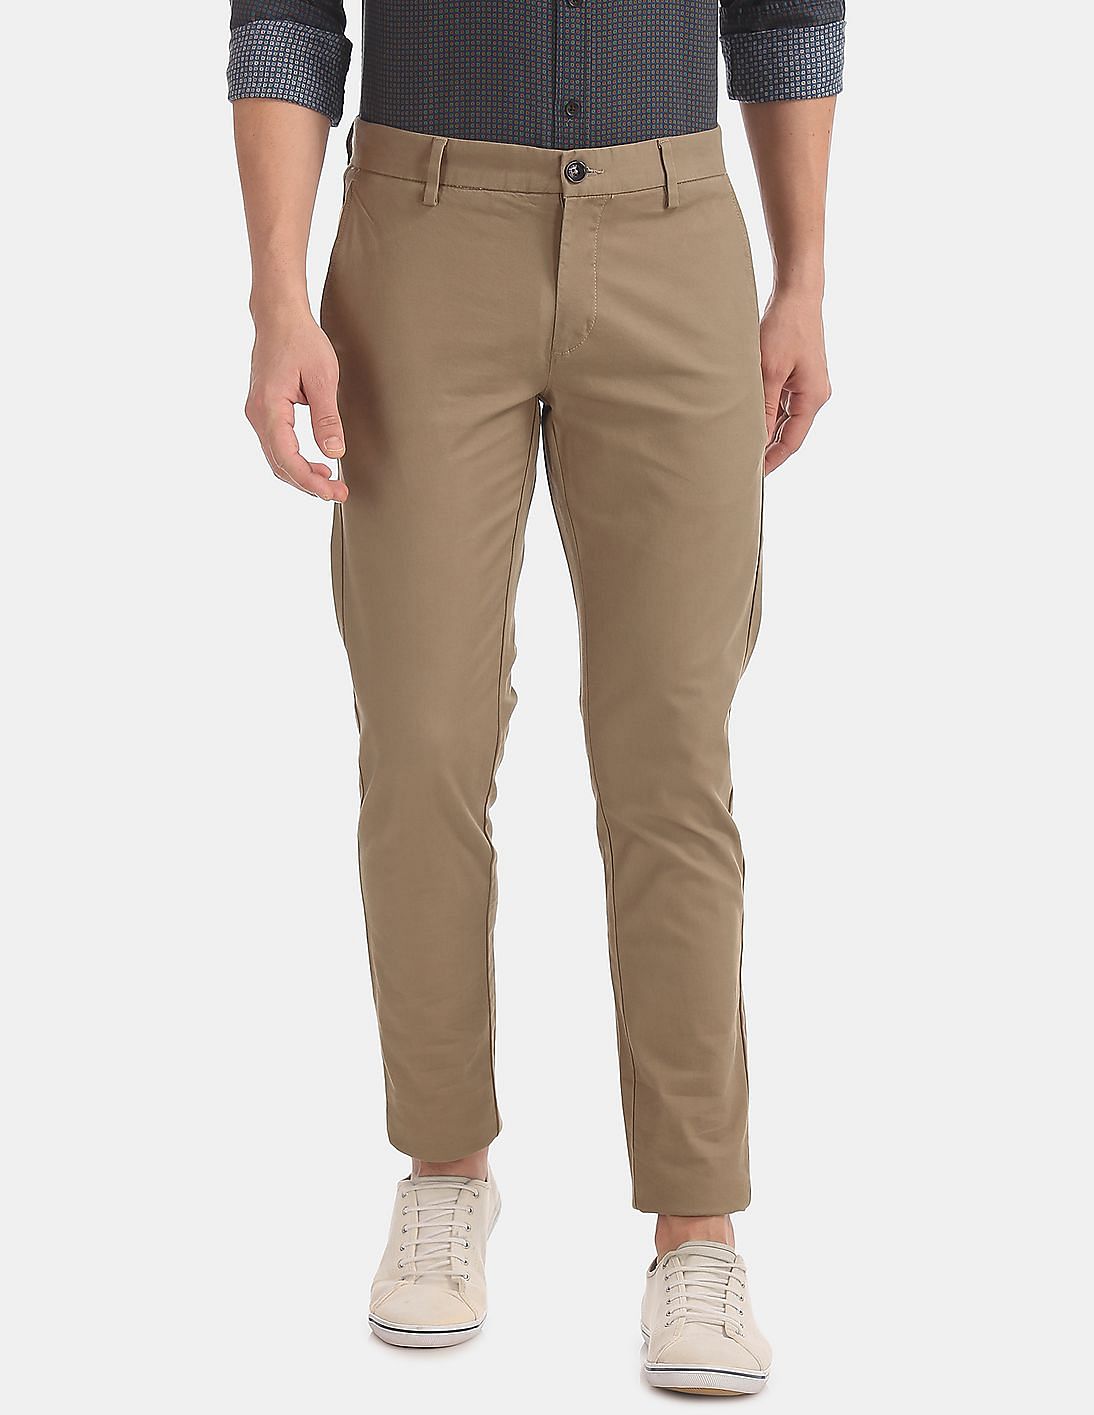 Buy Men Trim Fit Twill Weave Chinos online at NNNOW.com